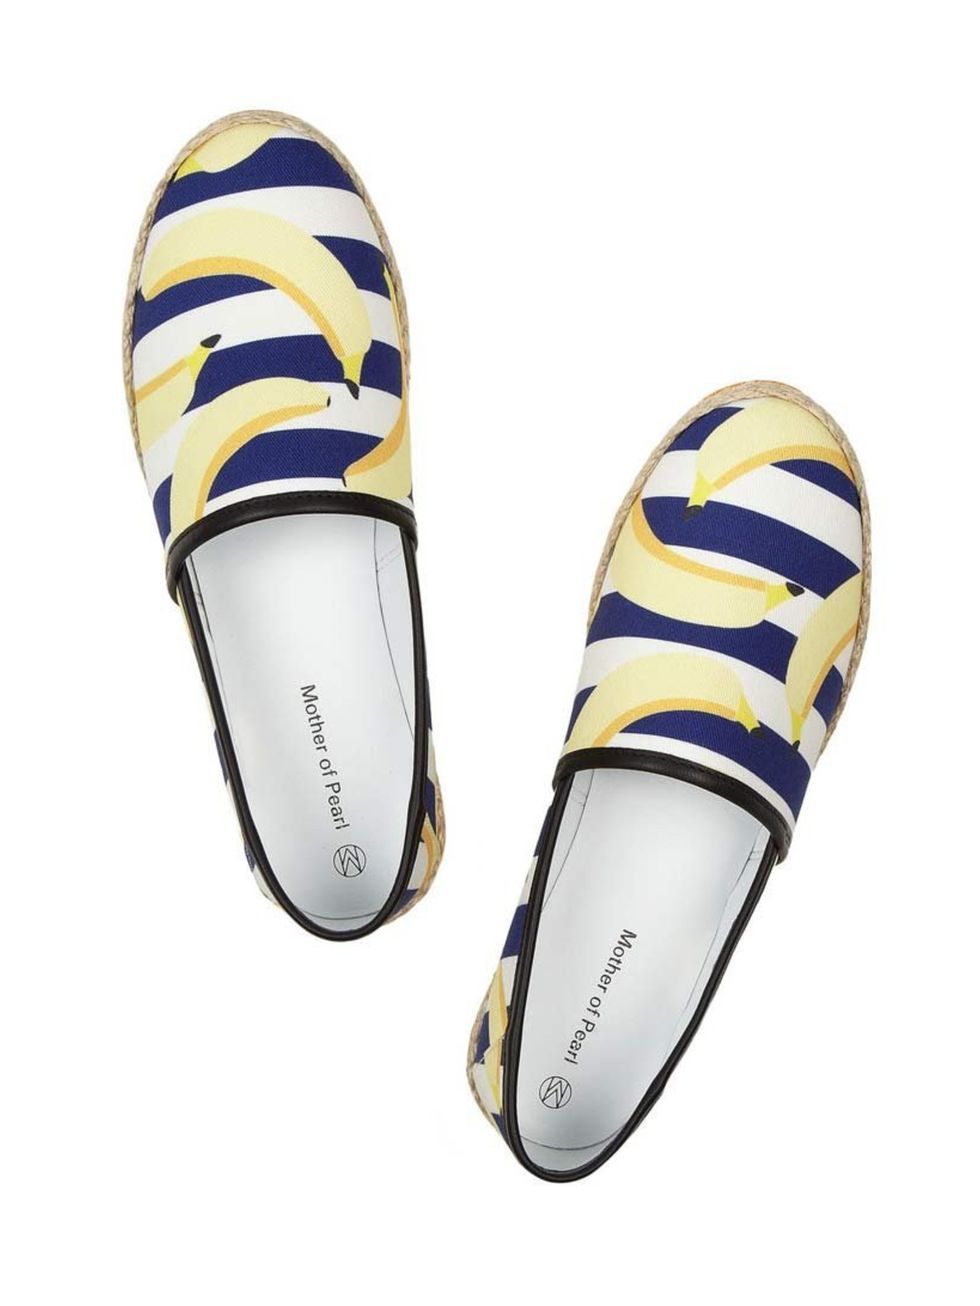 <p>Go bananas. </p><p>Mother of Pearl espadrilles, £195 at <a href="http://www.net-a-porter.com/product/432921/Mother_of_Pearl/lagan-banana-print-canvas-espadrilles">Net-A-Porter</a></p>